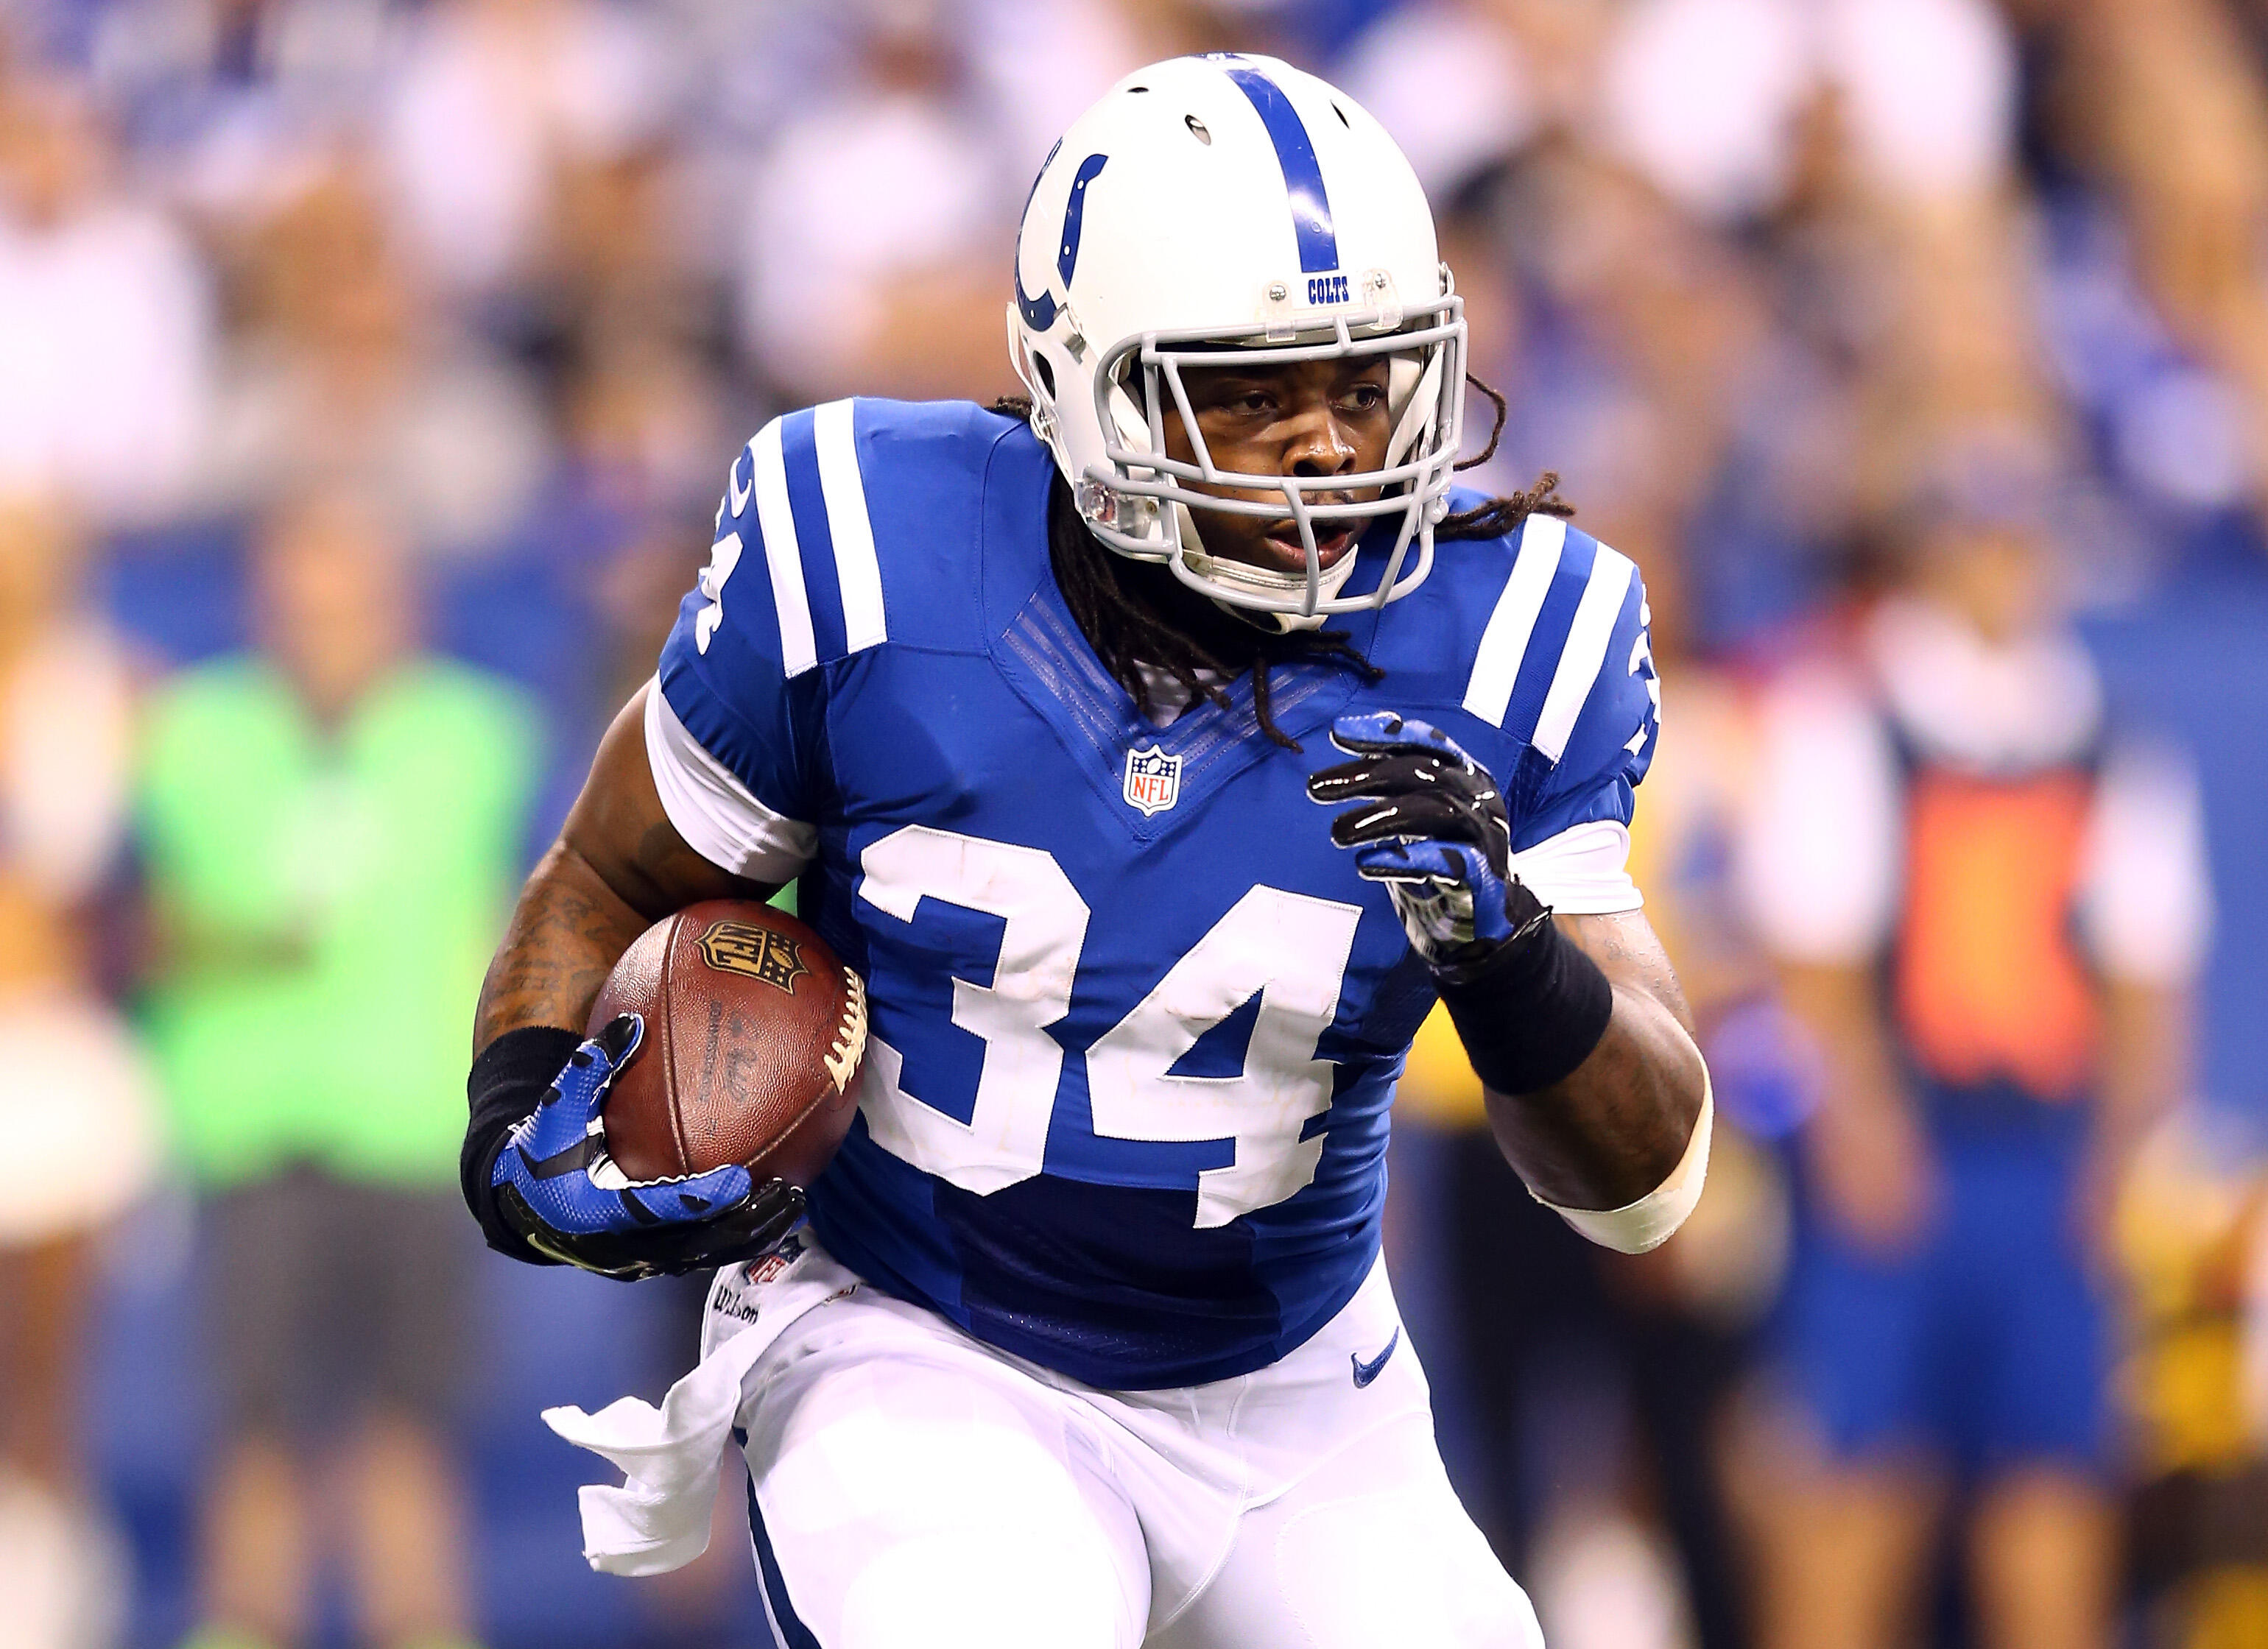 INDIANAPOLIS, IN - SEPTEMBER 15: Running back Trent Richardson #34 of the Indianapolis Colts carries the ball against the Philadelphia Eagles during a game at Lucas Oil Stadium on September 15, 2014 in Indianapolis, Indiana.  (Photo by Andy Lyons/Getty Im